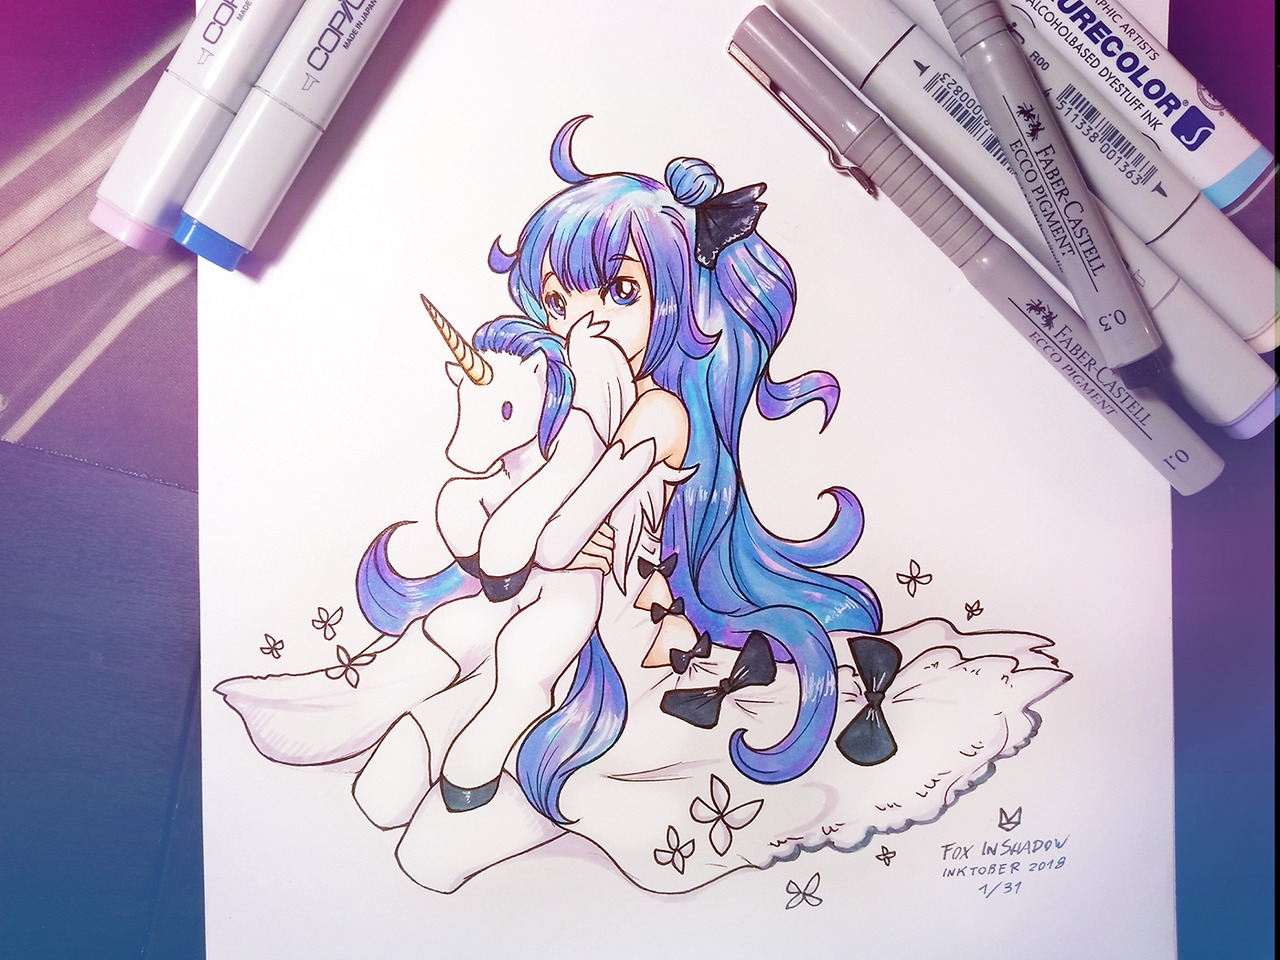 Kicking off this years Inktober with Unicorn from Azur Lane (and colored with markers